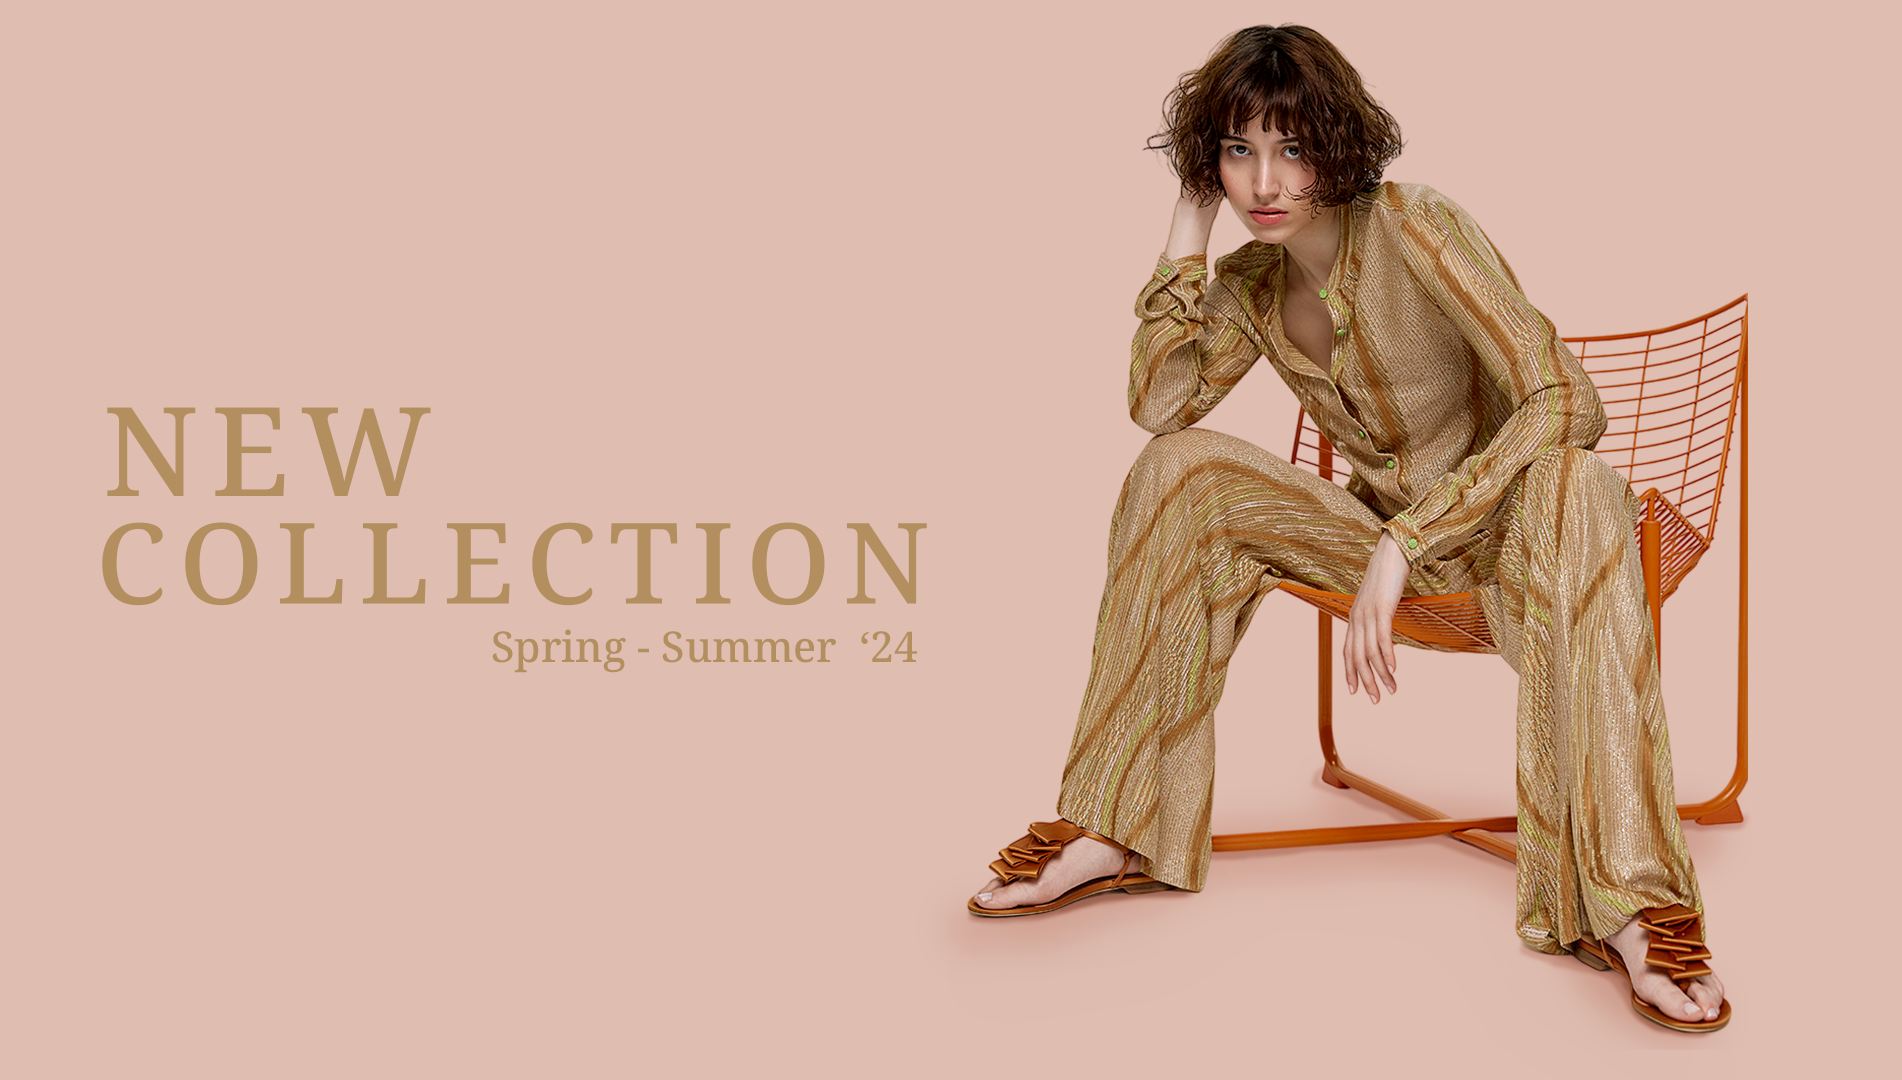 New Collection Spring - Summer '24